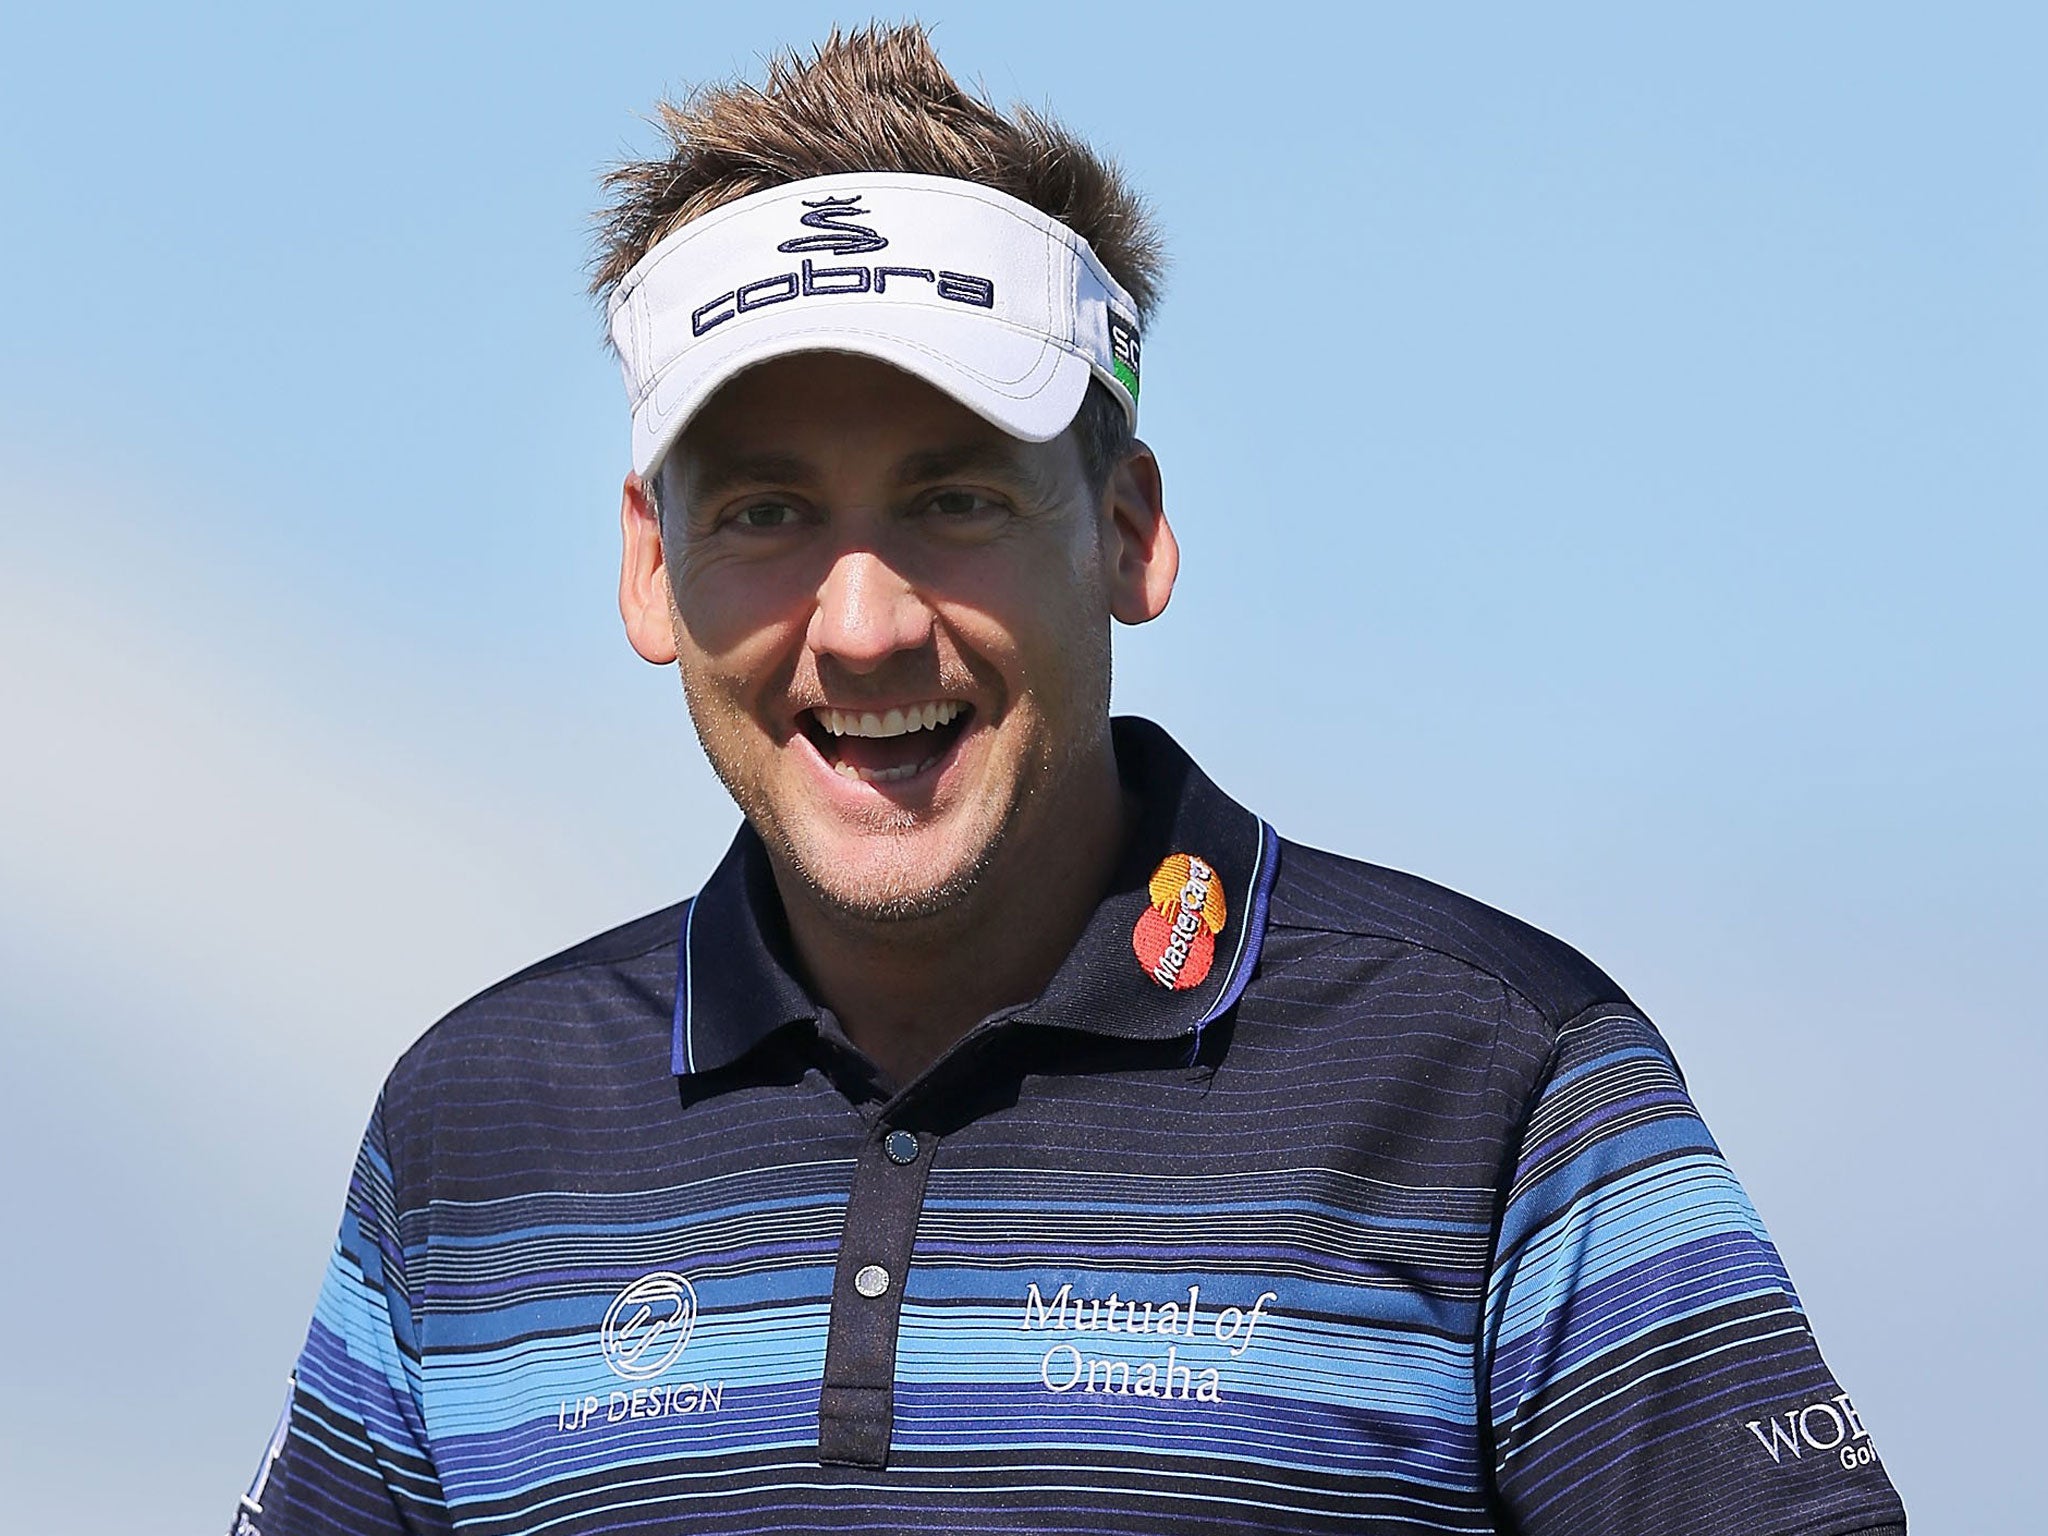 Ian Poulter inspired Europe to success in Boston last year